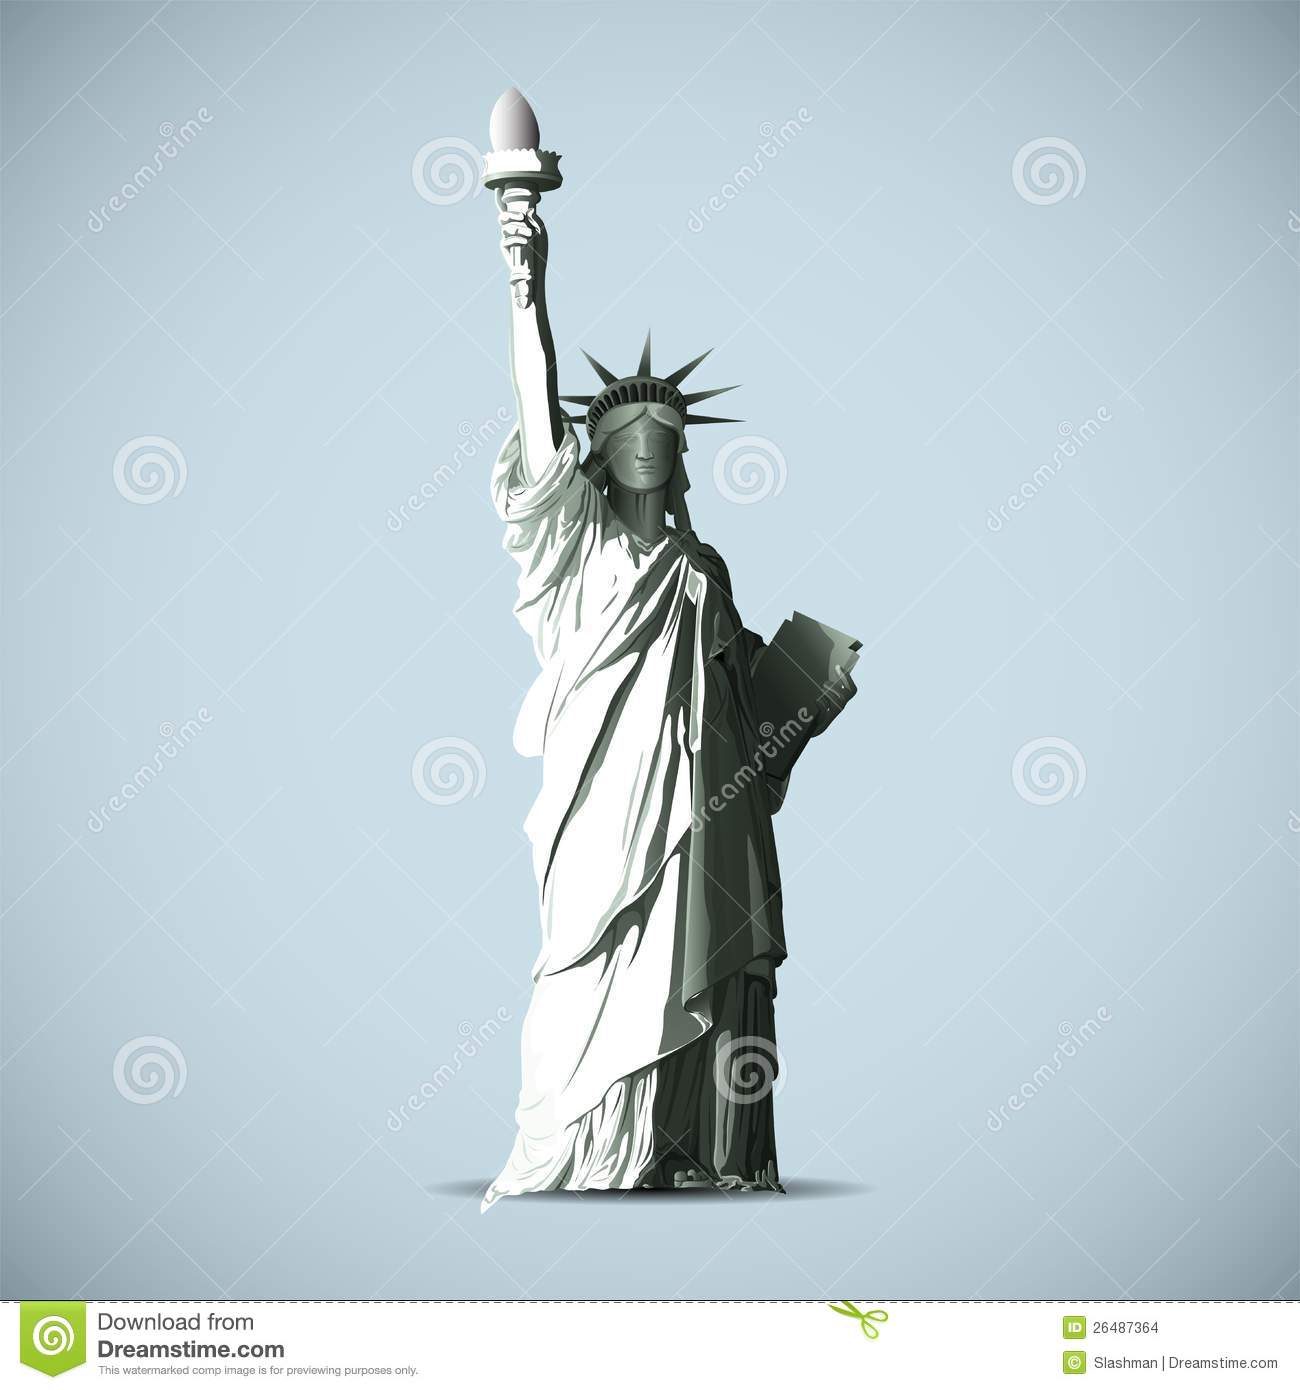 Statue of Liberty Silhouette Vector